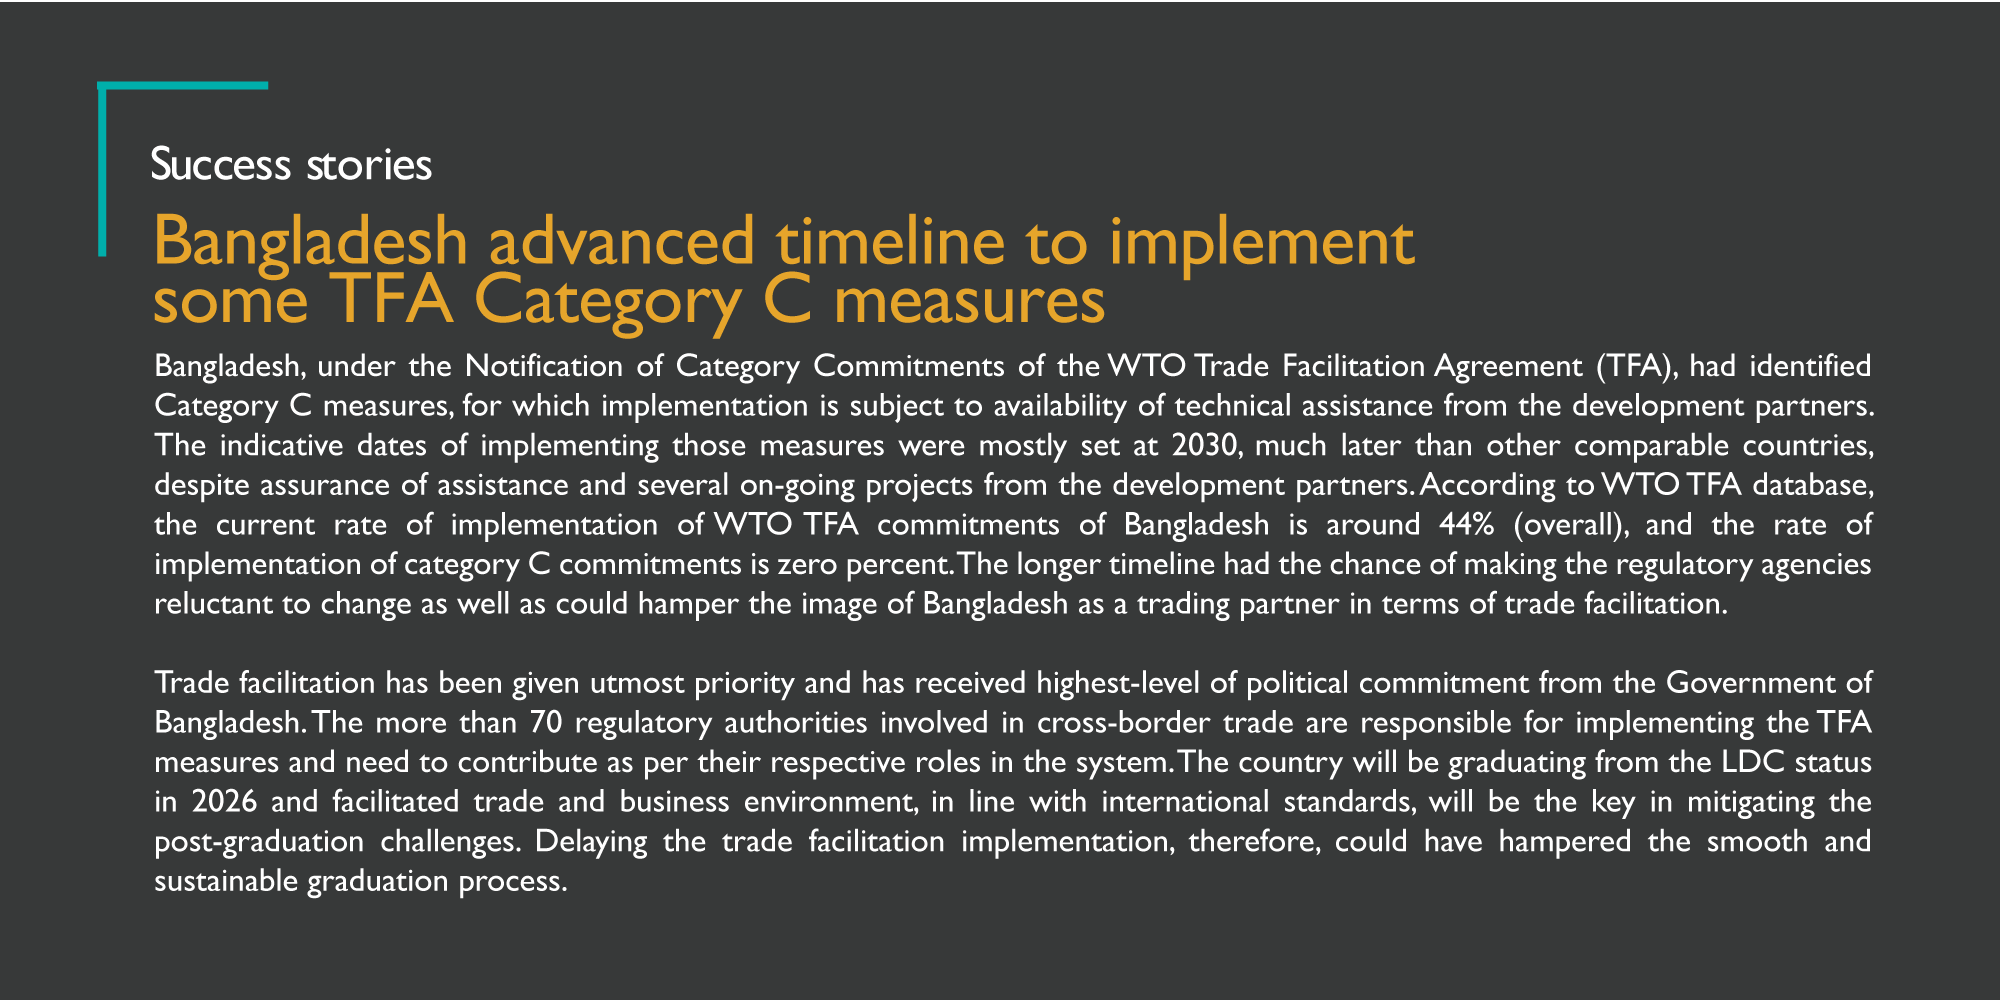 Bangladesh advanced timeline to implement some TFA Category C measures